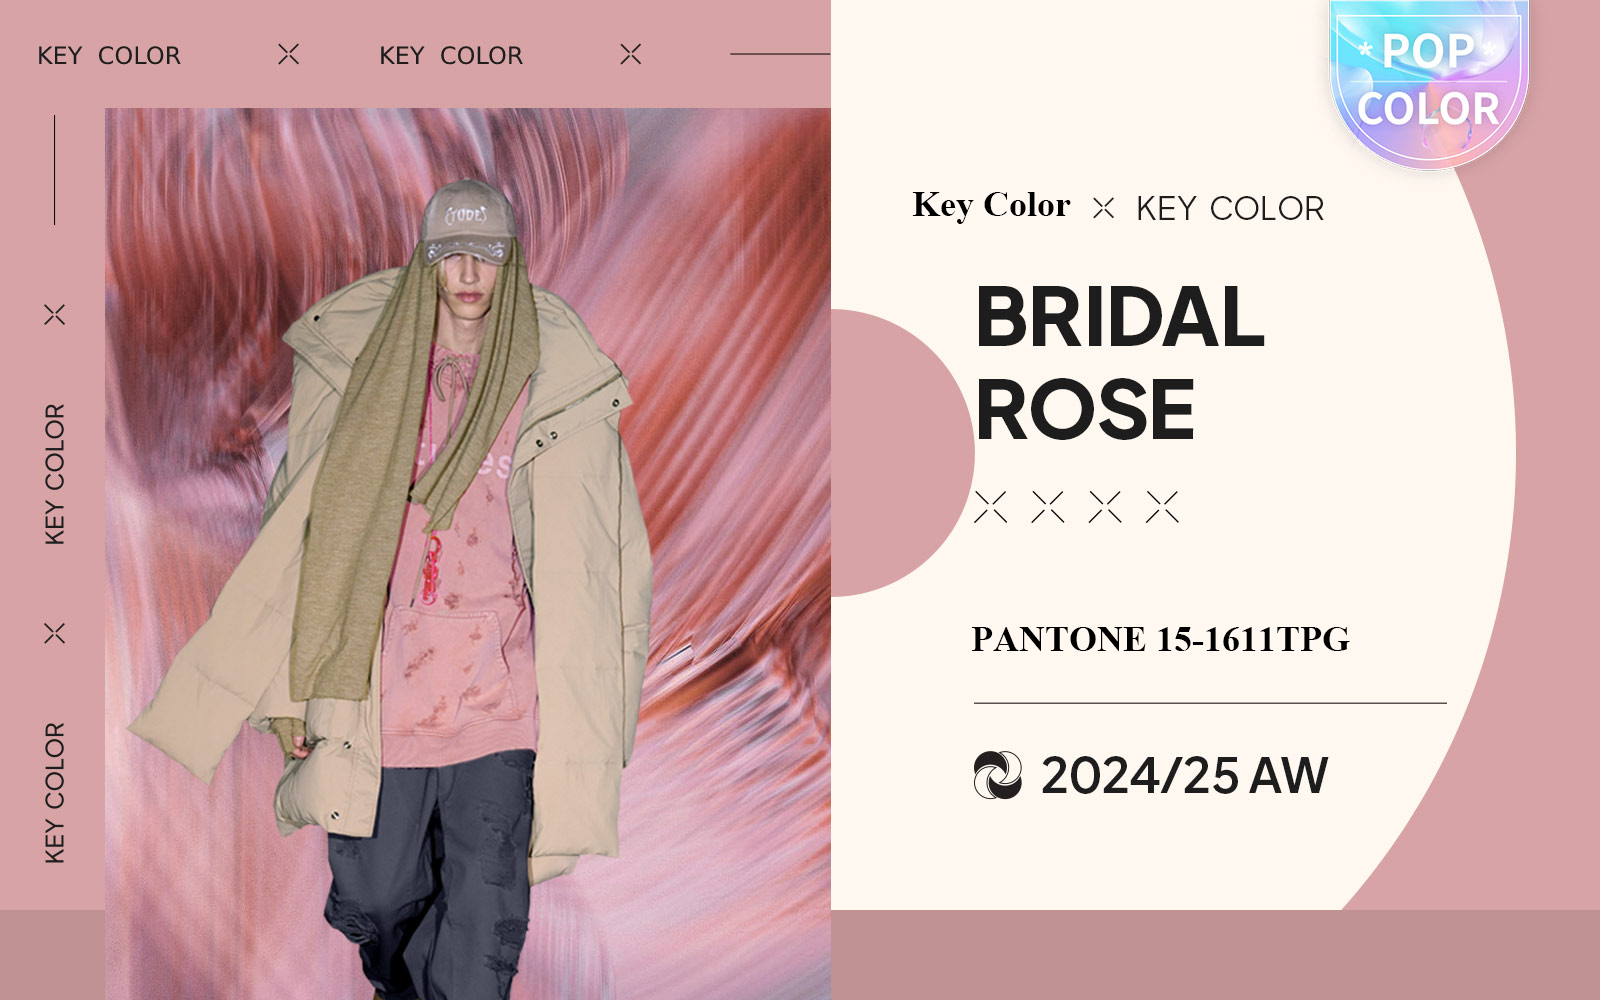 Bridal Rose -- The Color Trend for Menswear